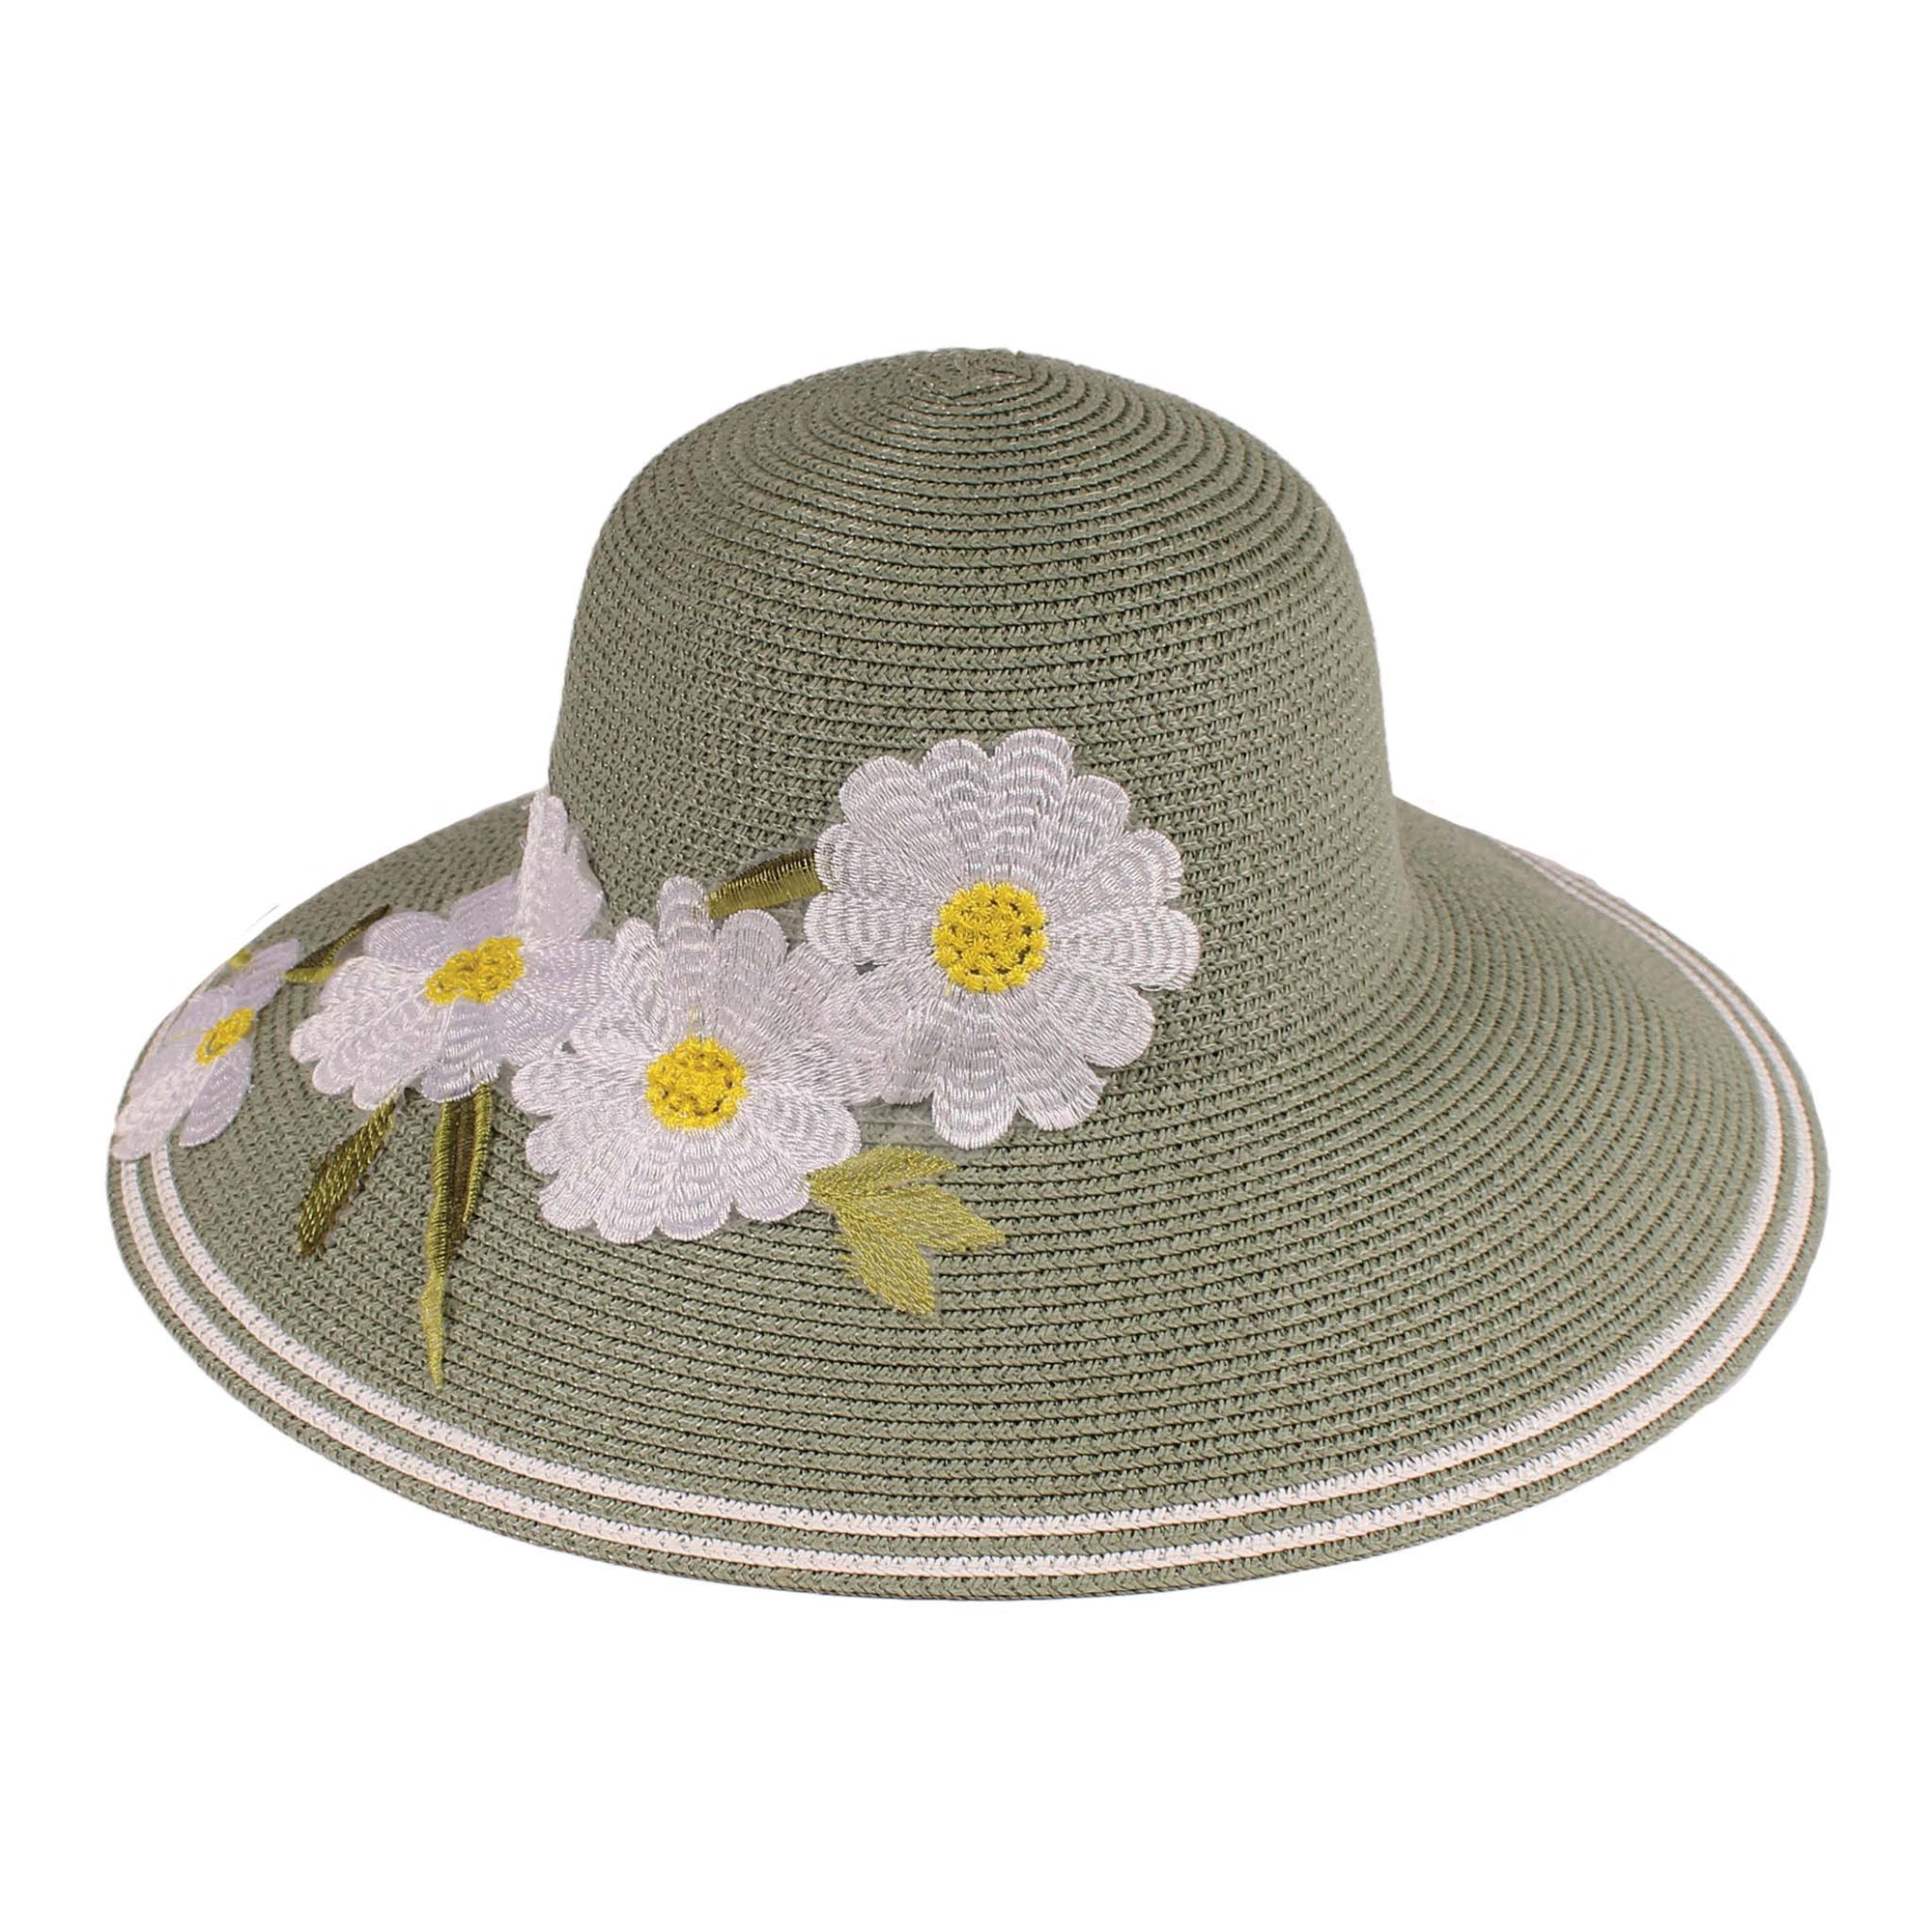 Green and White Hat with Daisy Applique